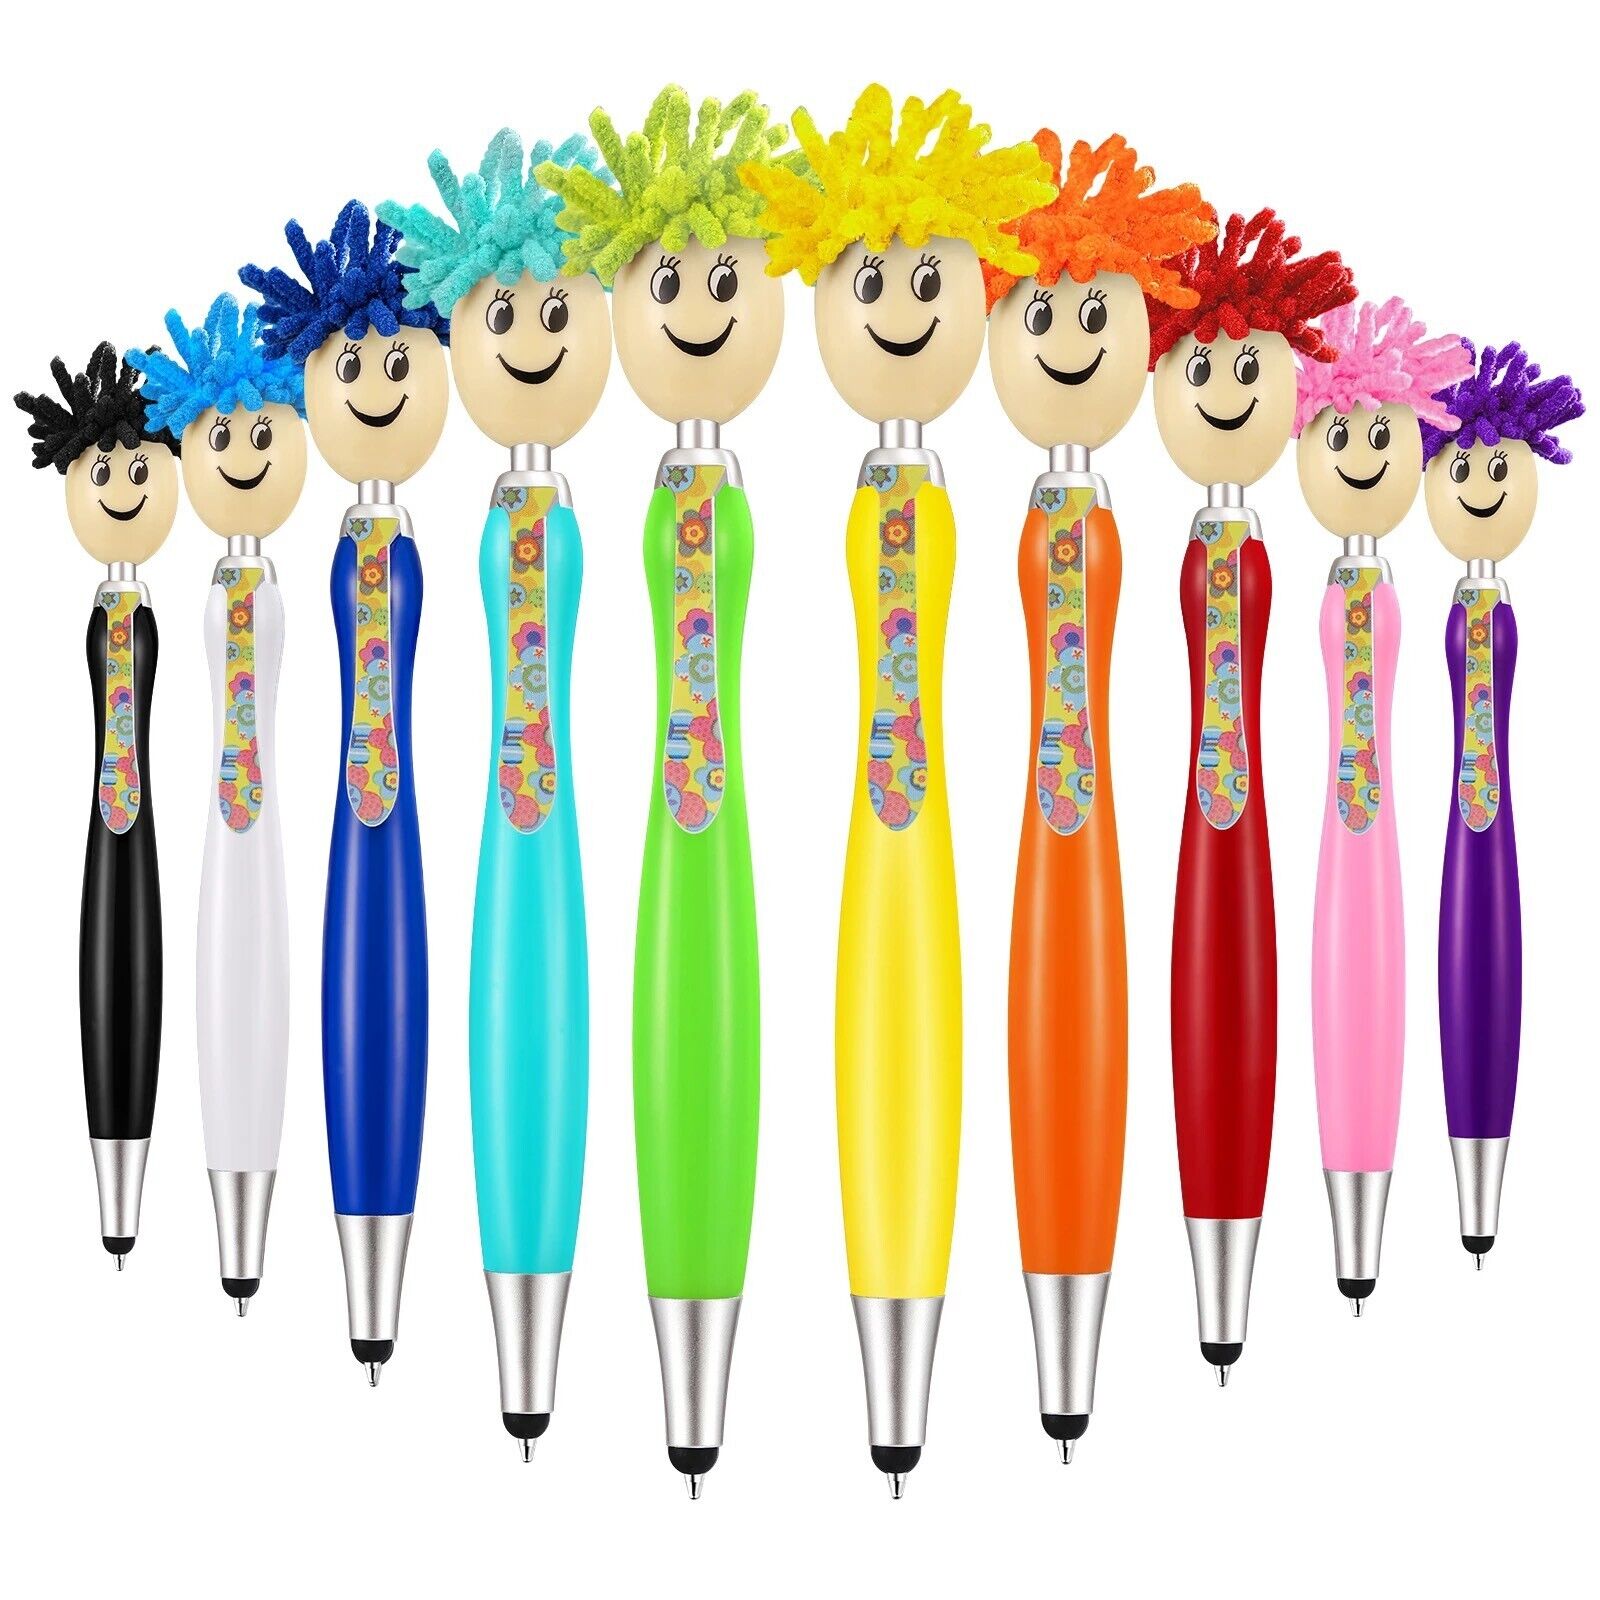 10 Pcs Cute and Creative Touch Screen Ballpoint Pen with Duster Doll Head 